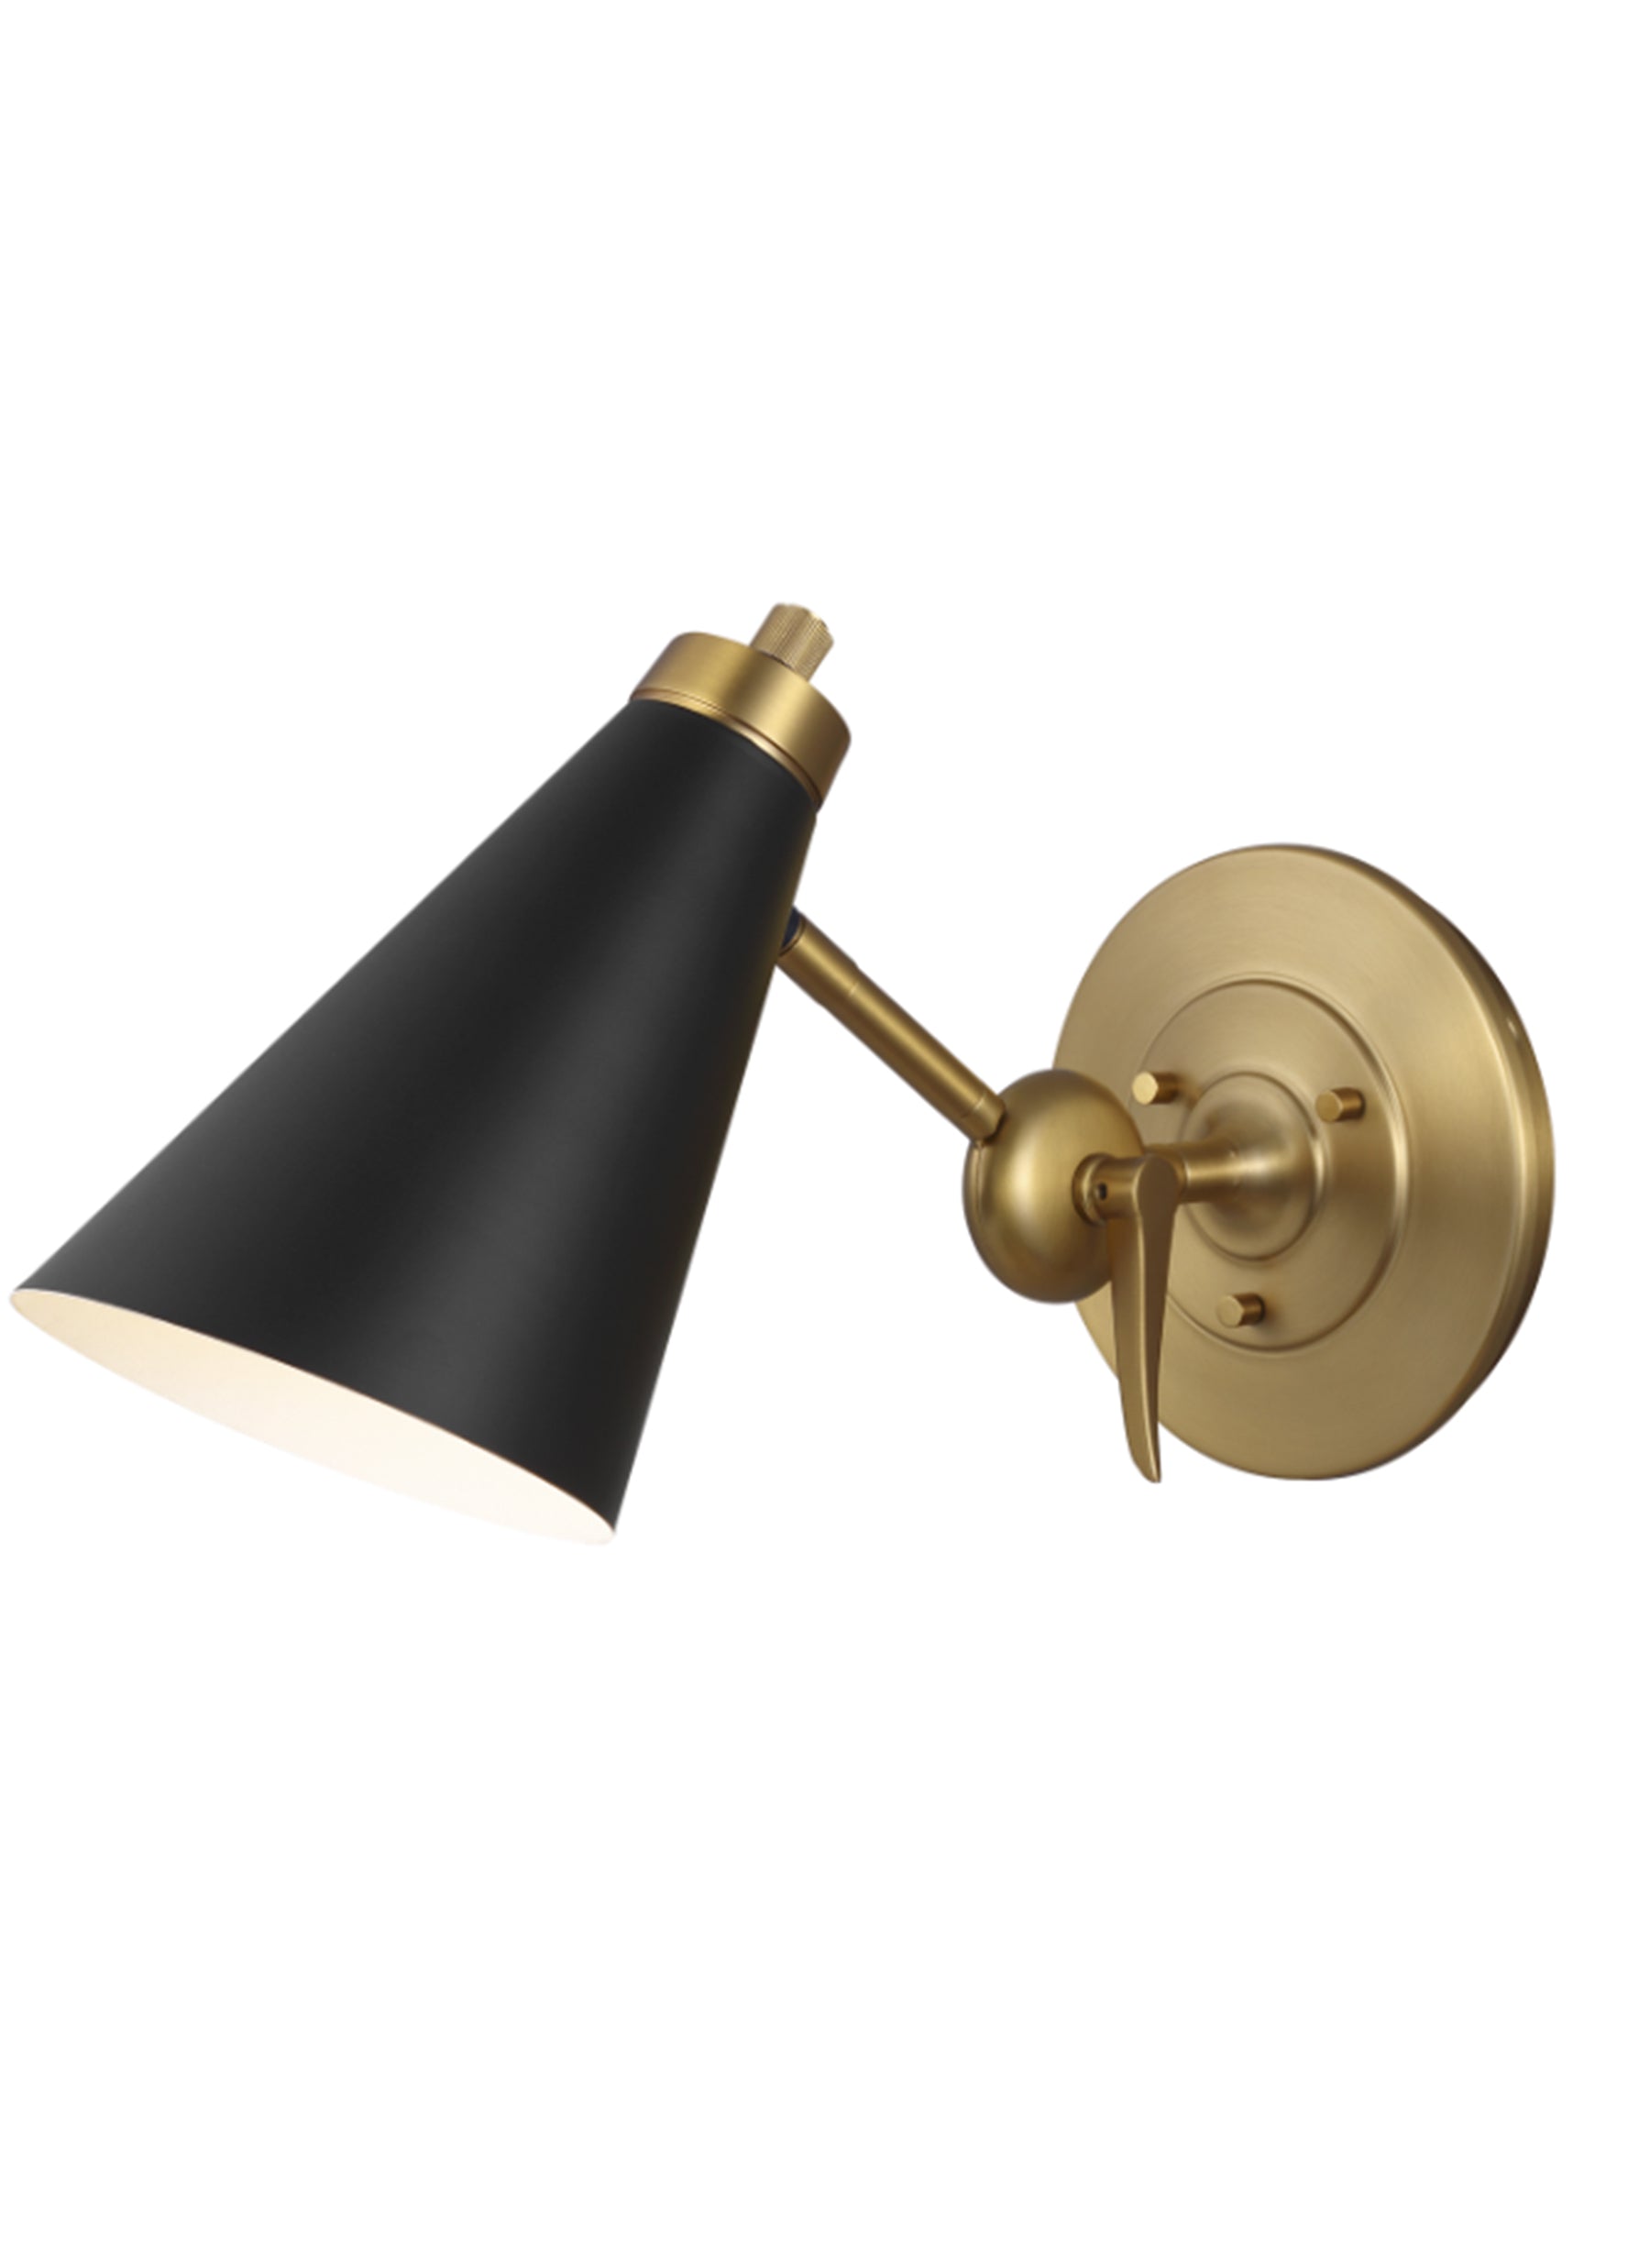 Signoret 1L wall sconce - TW1061BBS